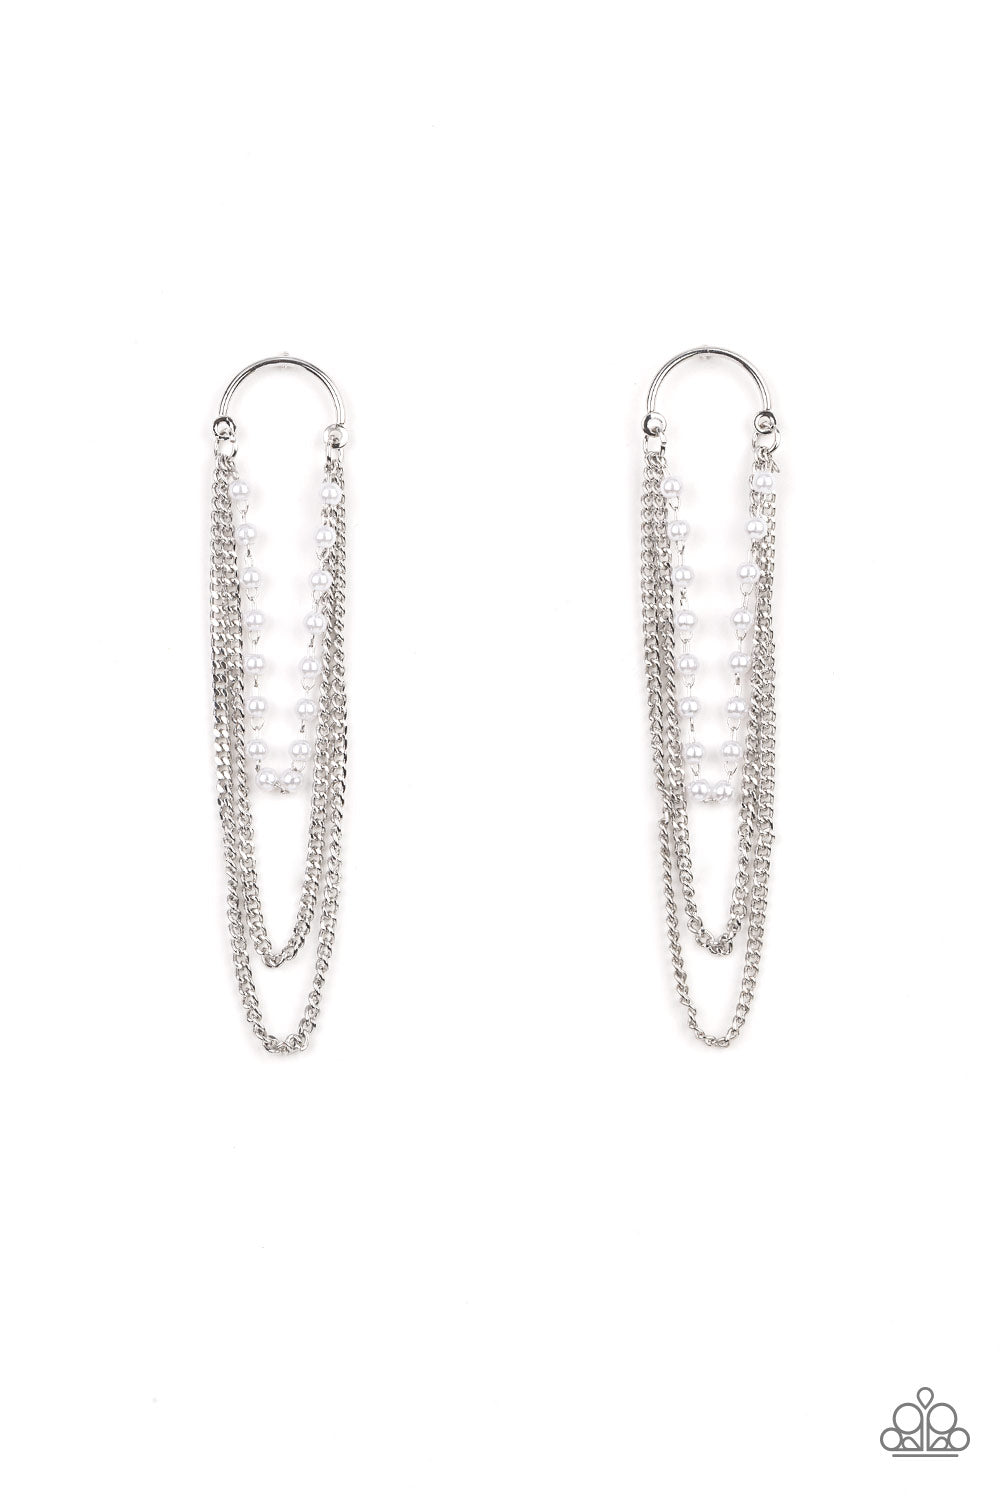 dainty white pearls and shimmery silver chains cascade from the bottom of a silver half moon frame